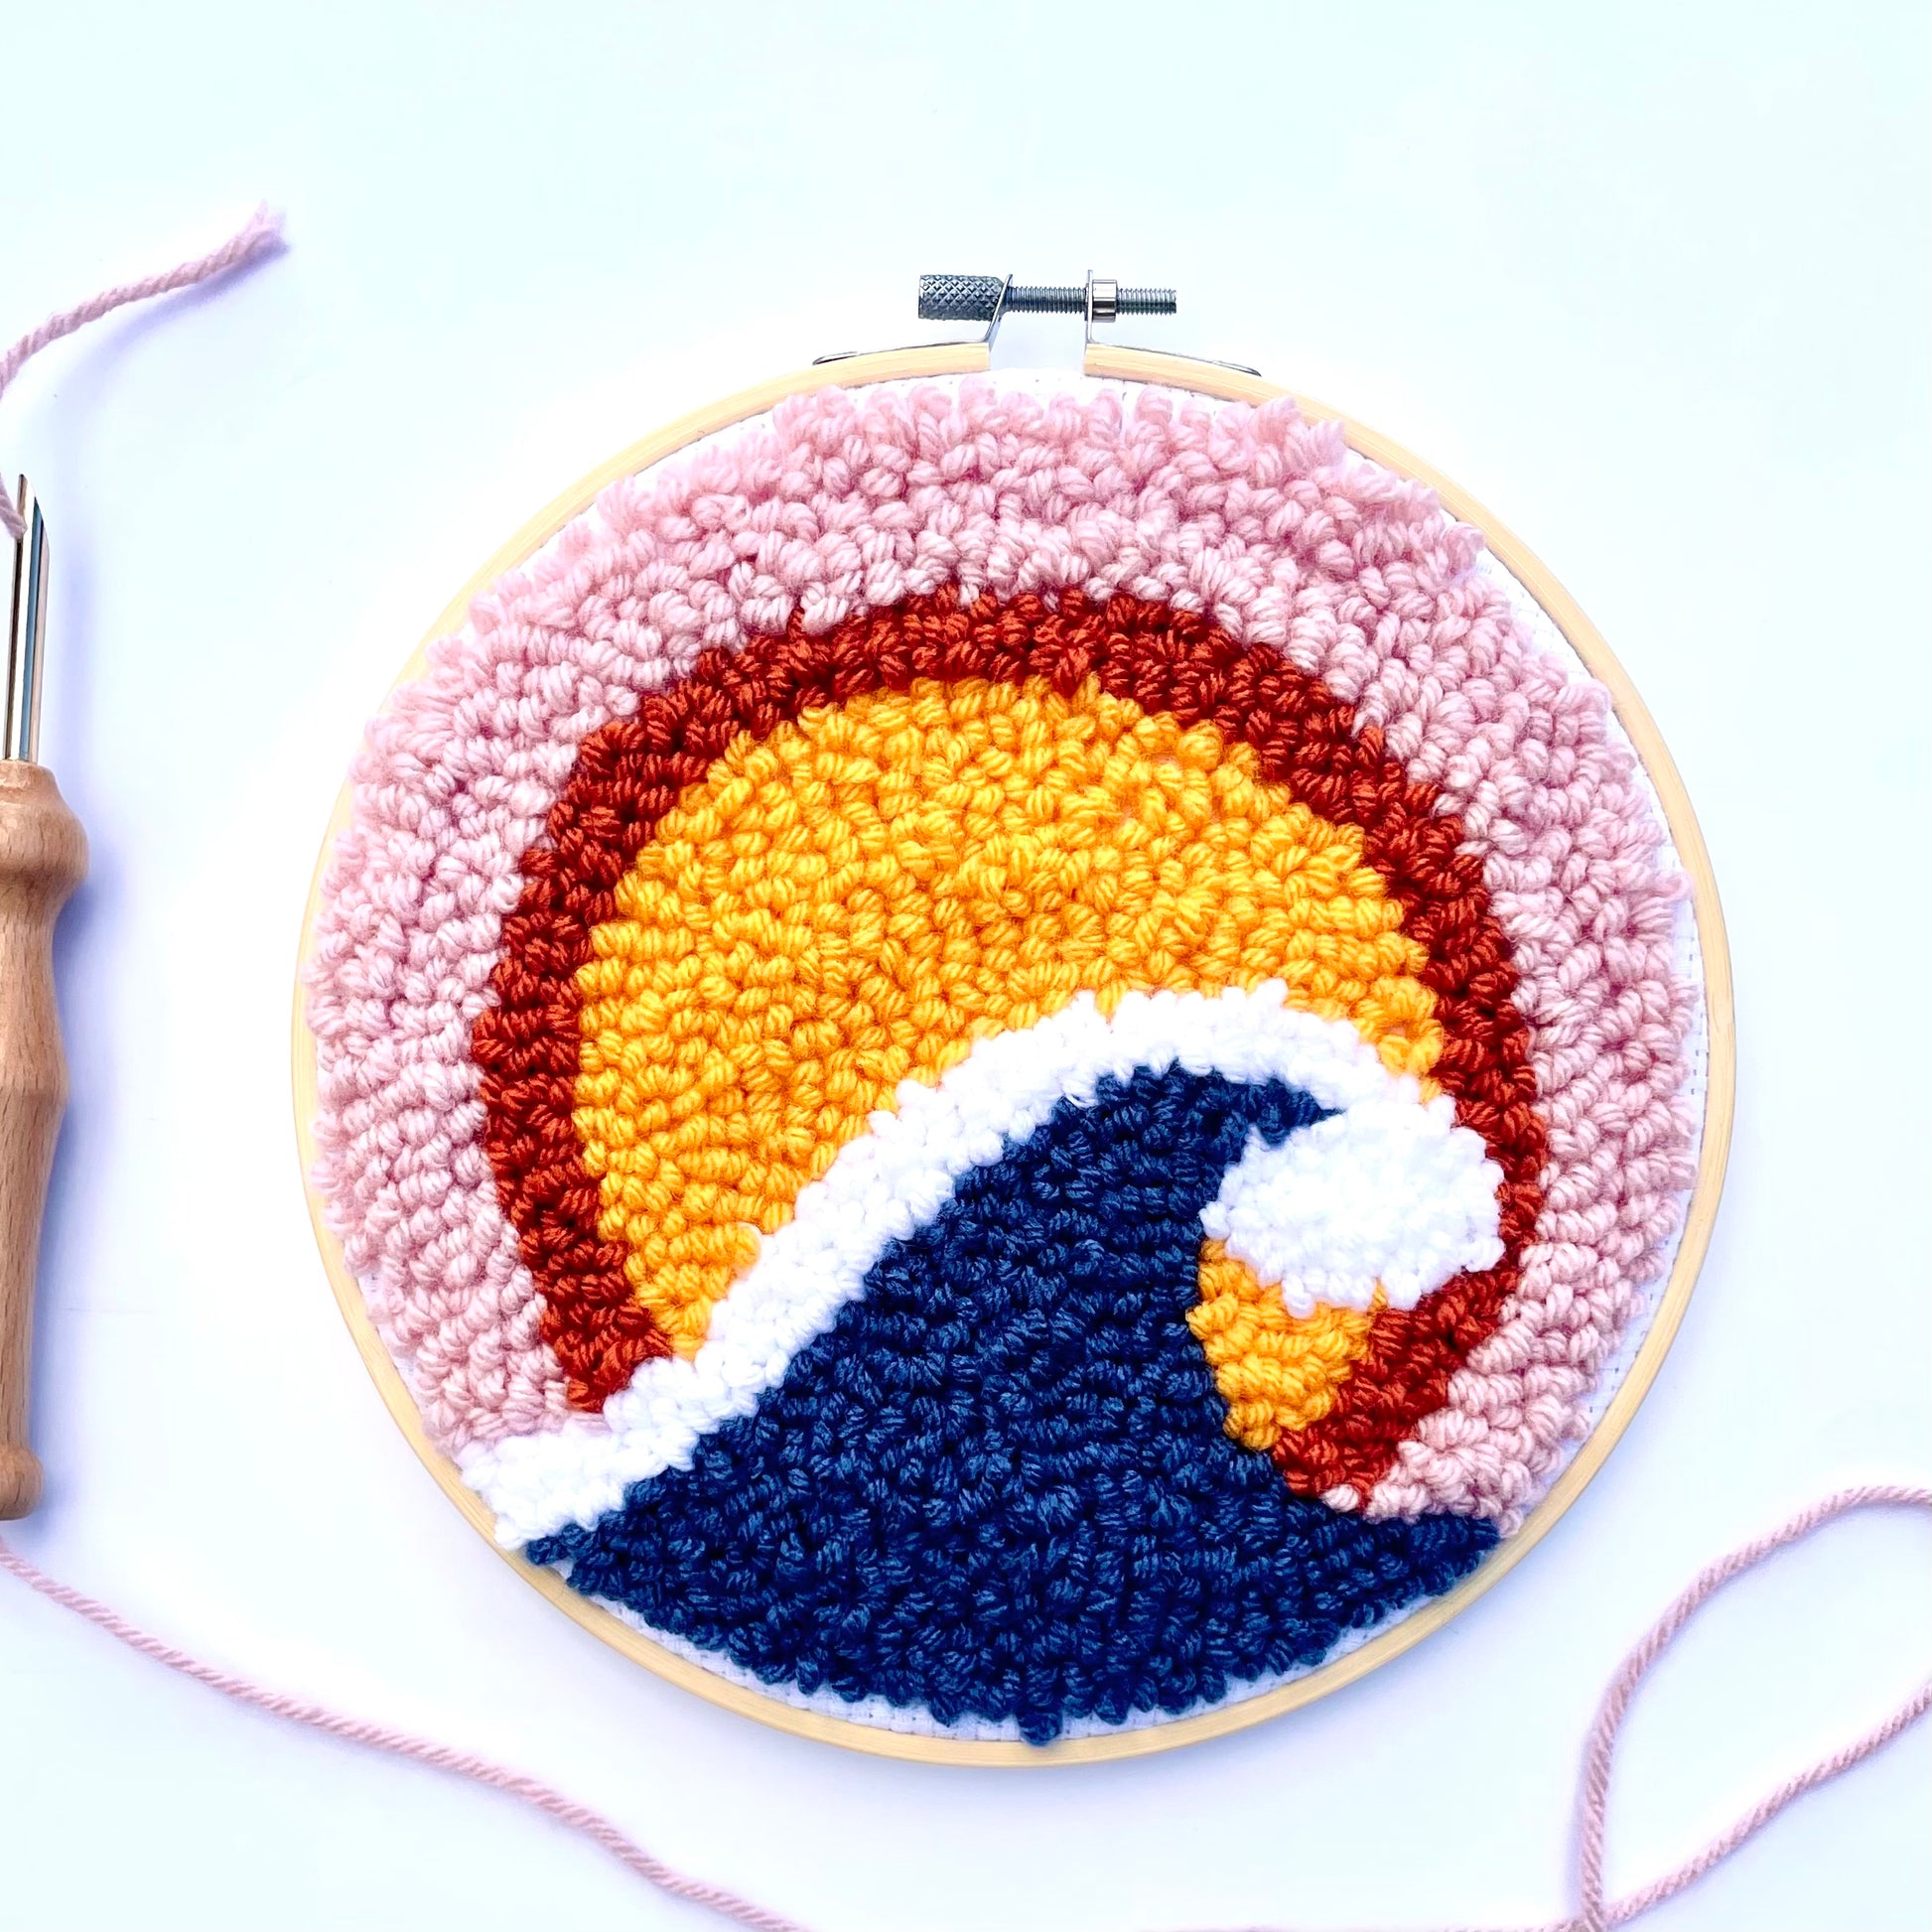 DIY Embroidery Kit for Beginners Into the Waves 